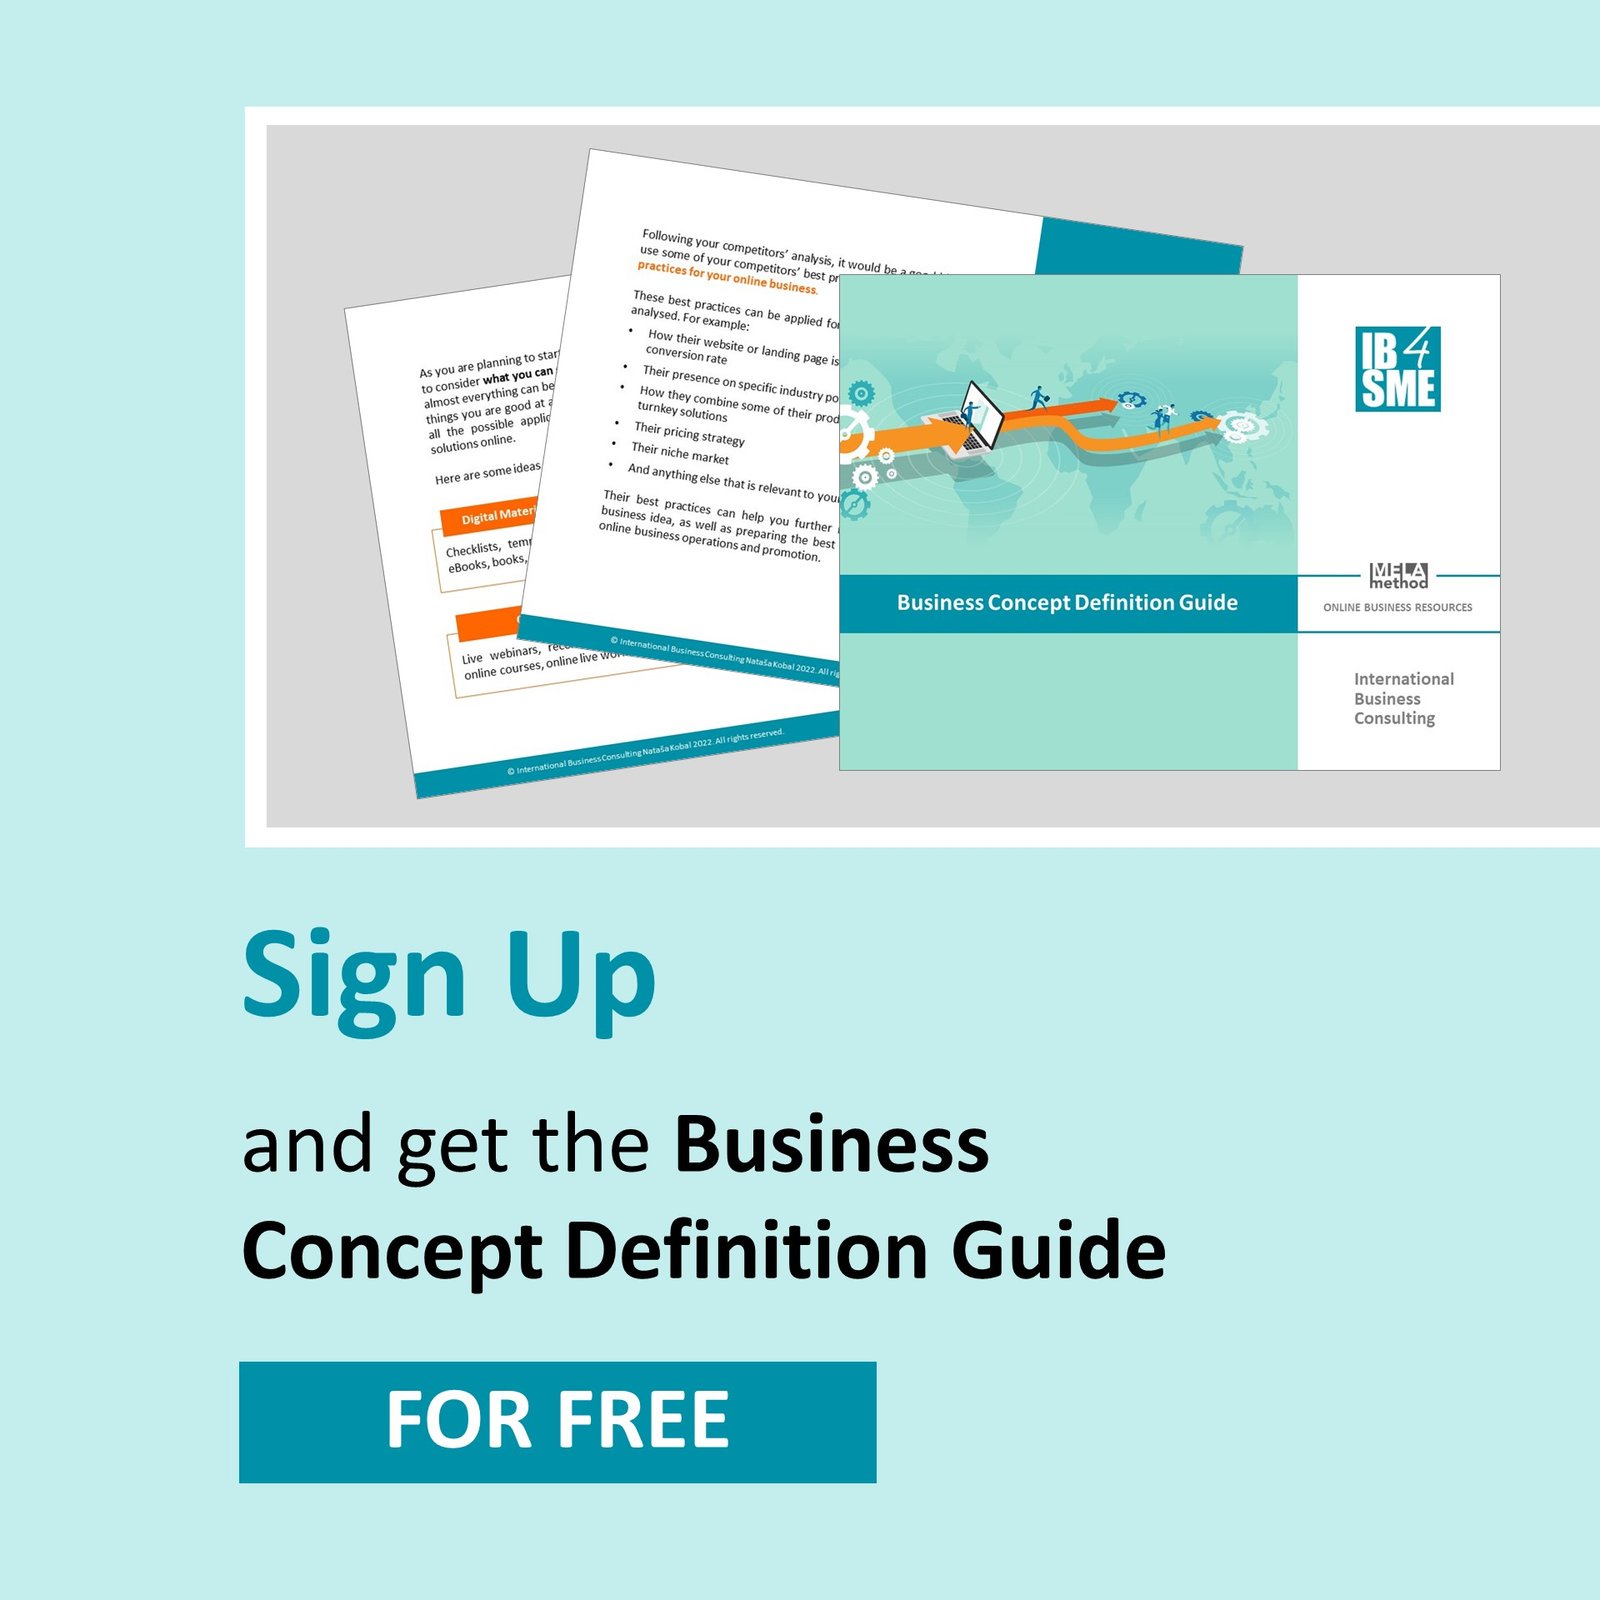 IB4SME Sign Up - Business Concept Definition Guide Free